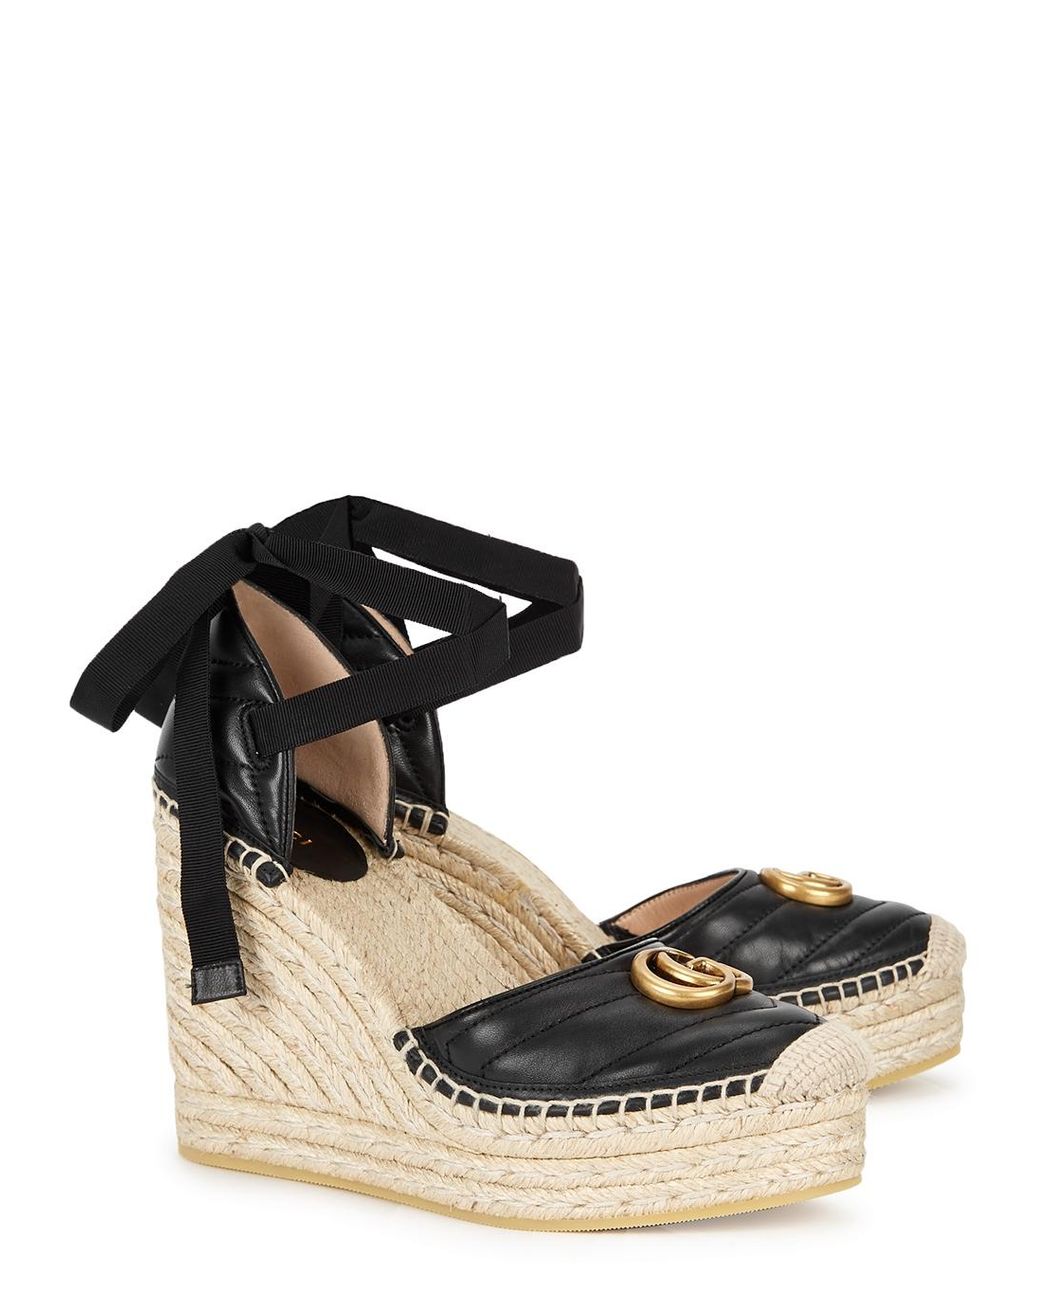 Gucci GG Marmont Black Leather Espadrille Wedges - Lyst